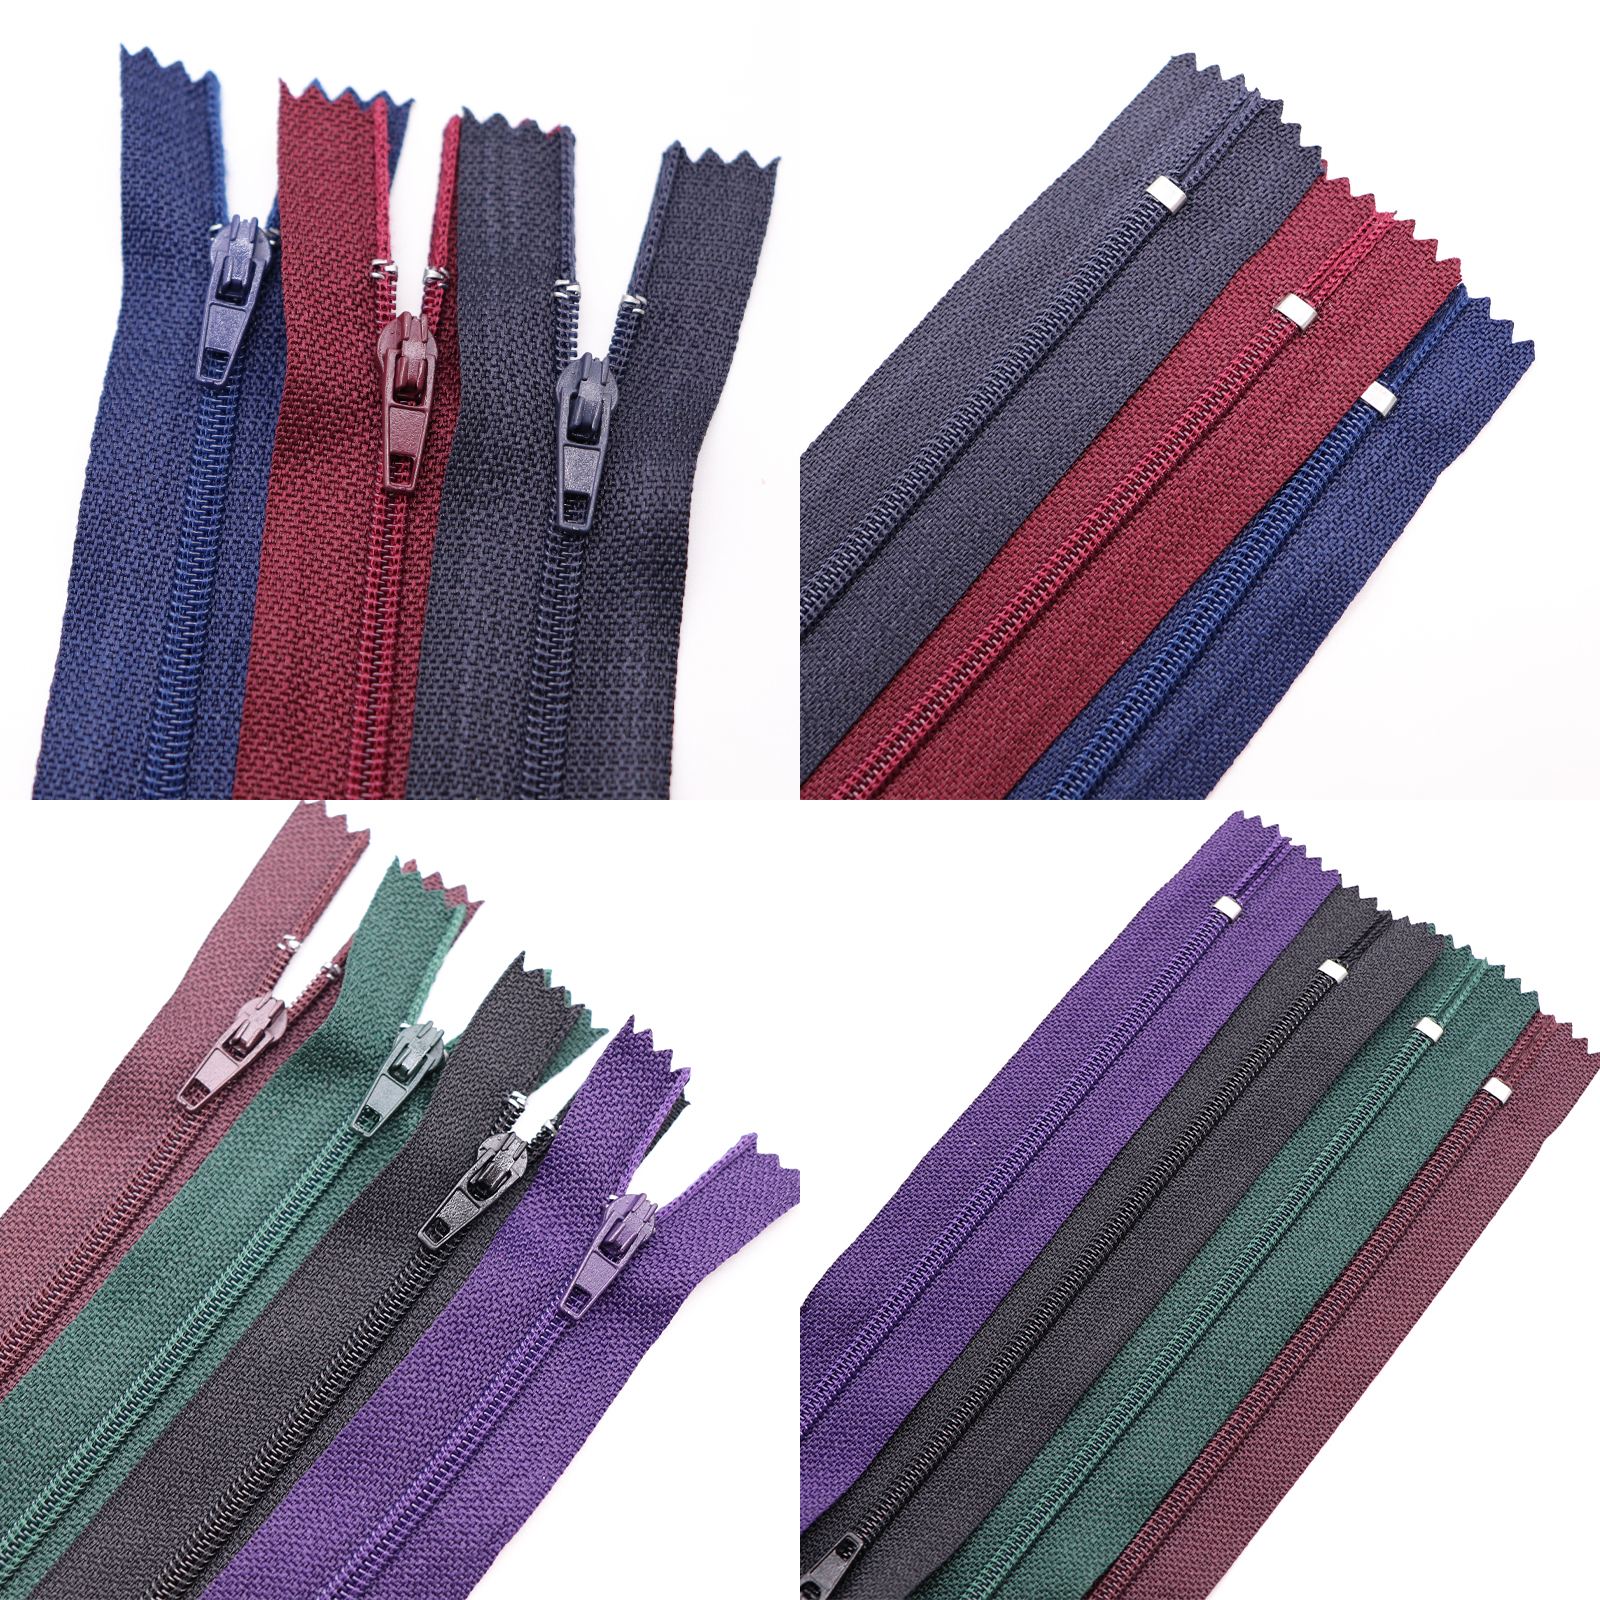 Colorful #3 #5 nylon close end zipper for luggage bags bag packaging bags metal zipper